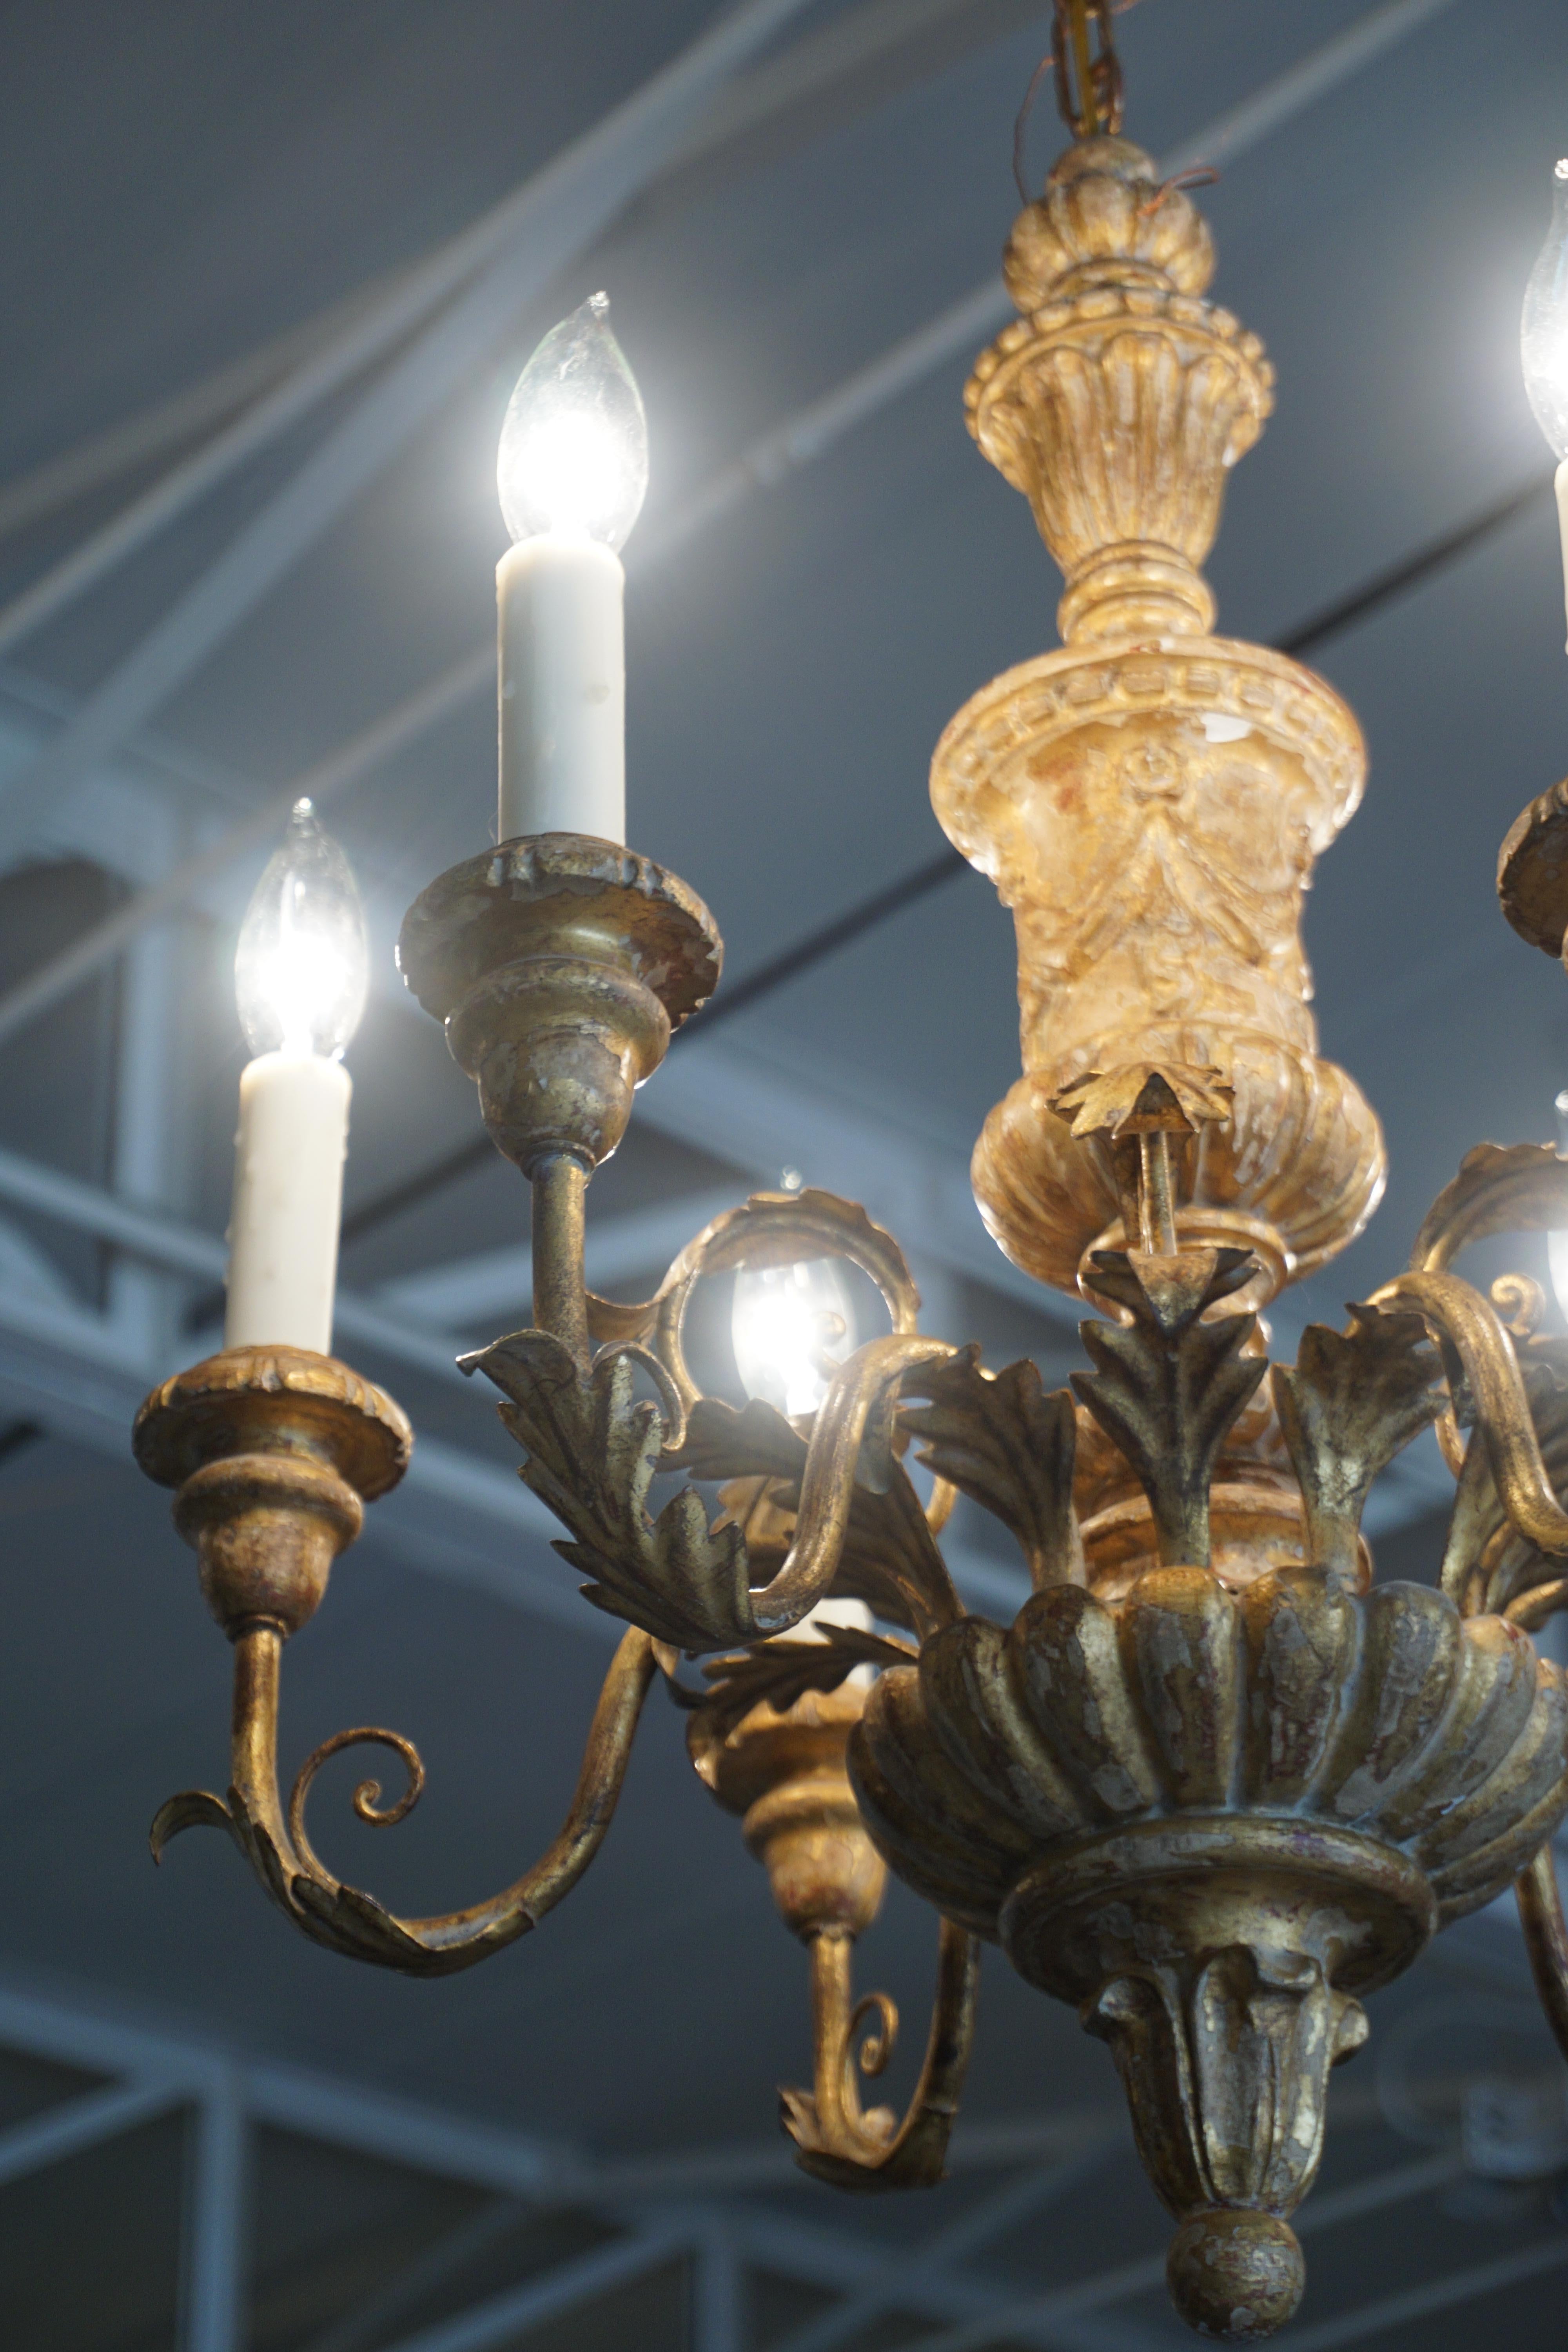 This petite chandelier originates from Italy and is made of giltwood and tole.

Measurements: 24'' H x 19'' W.